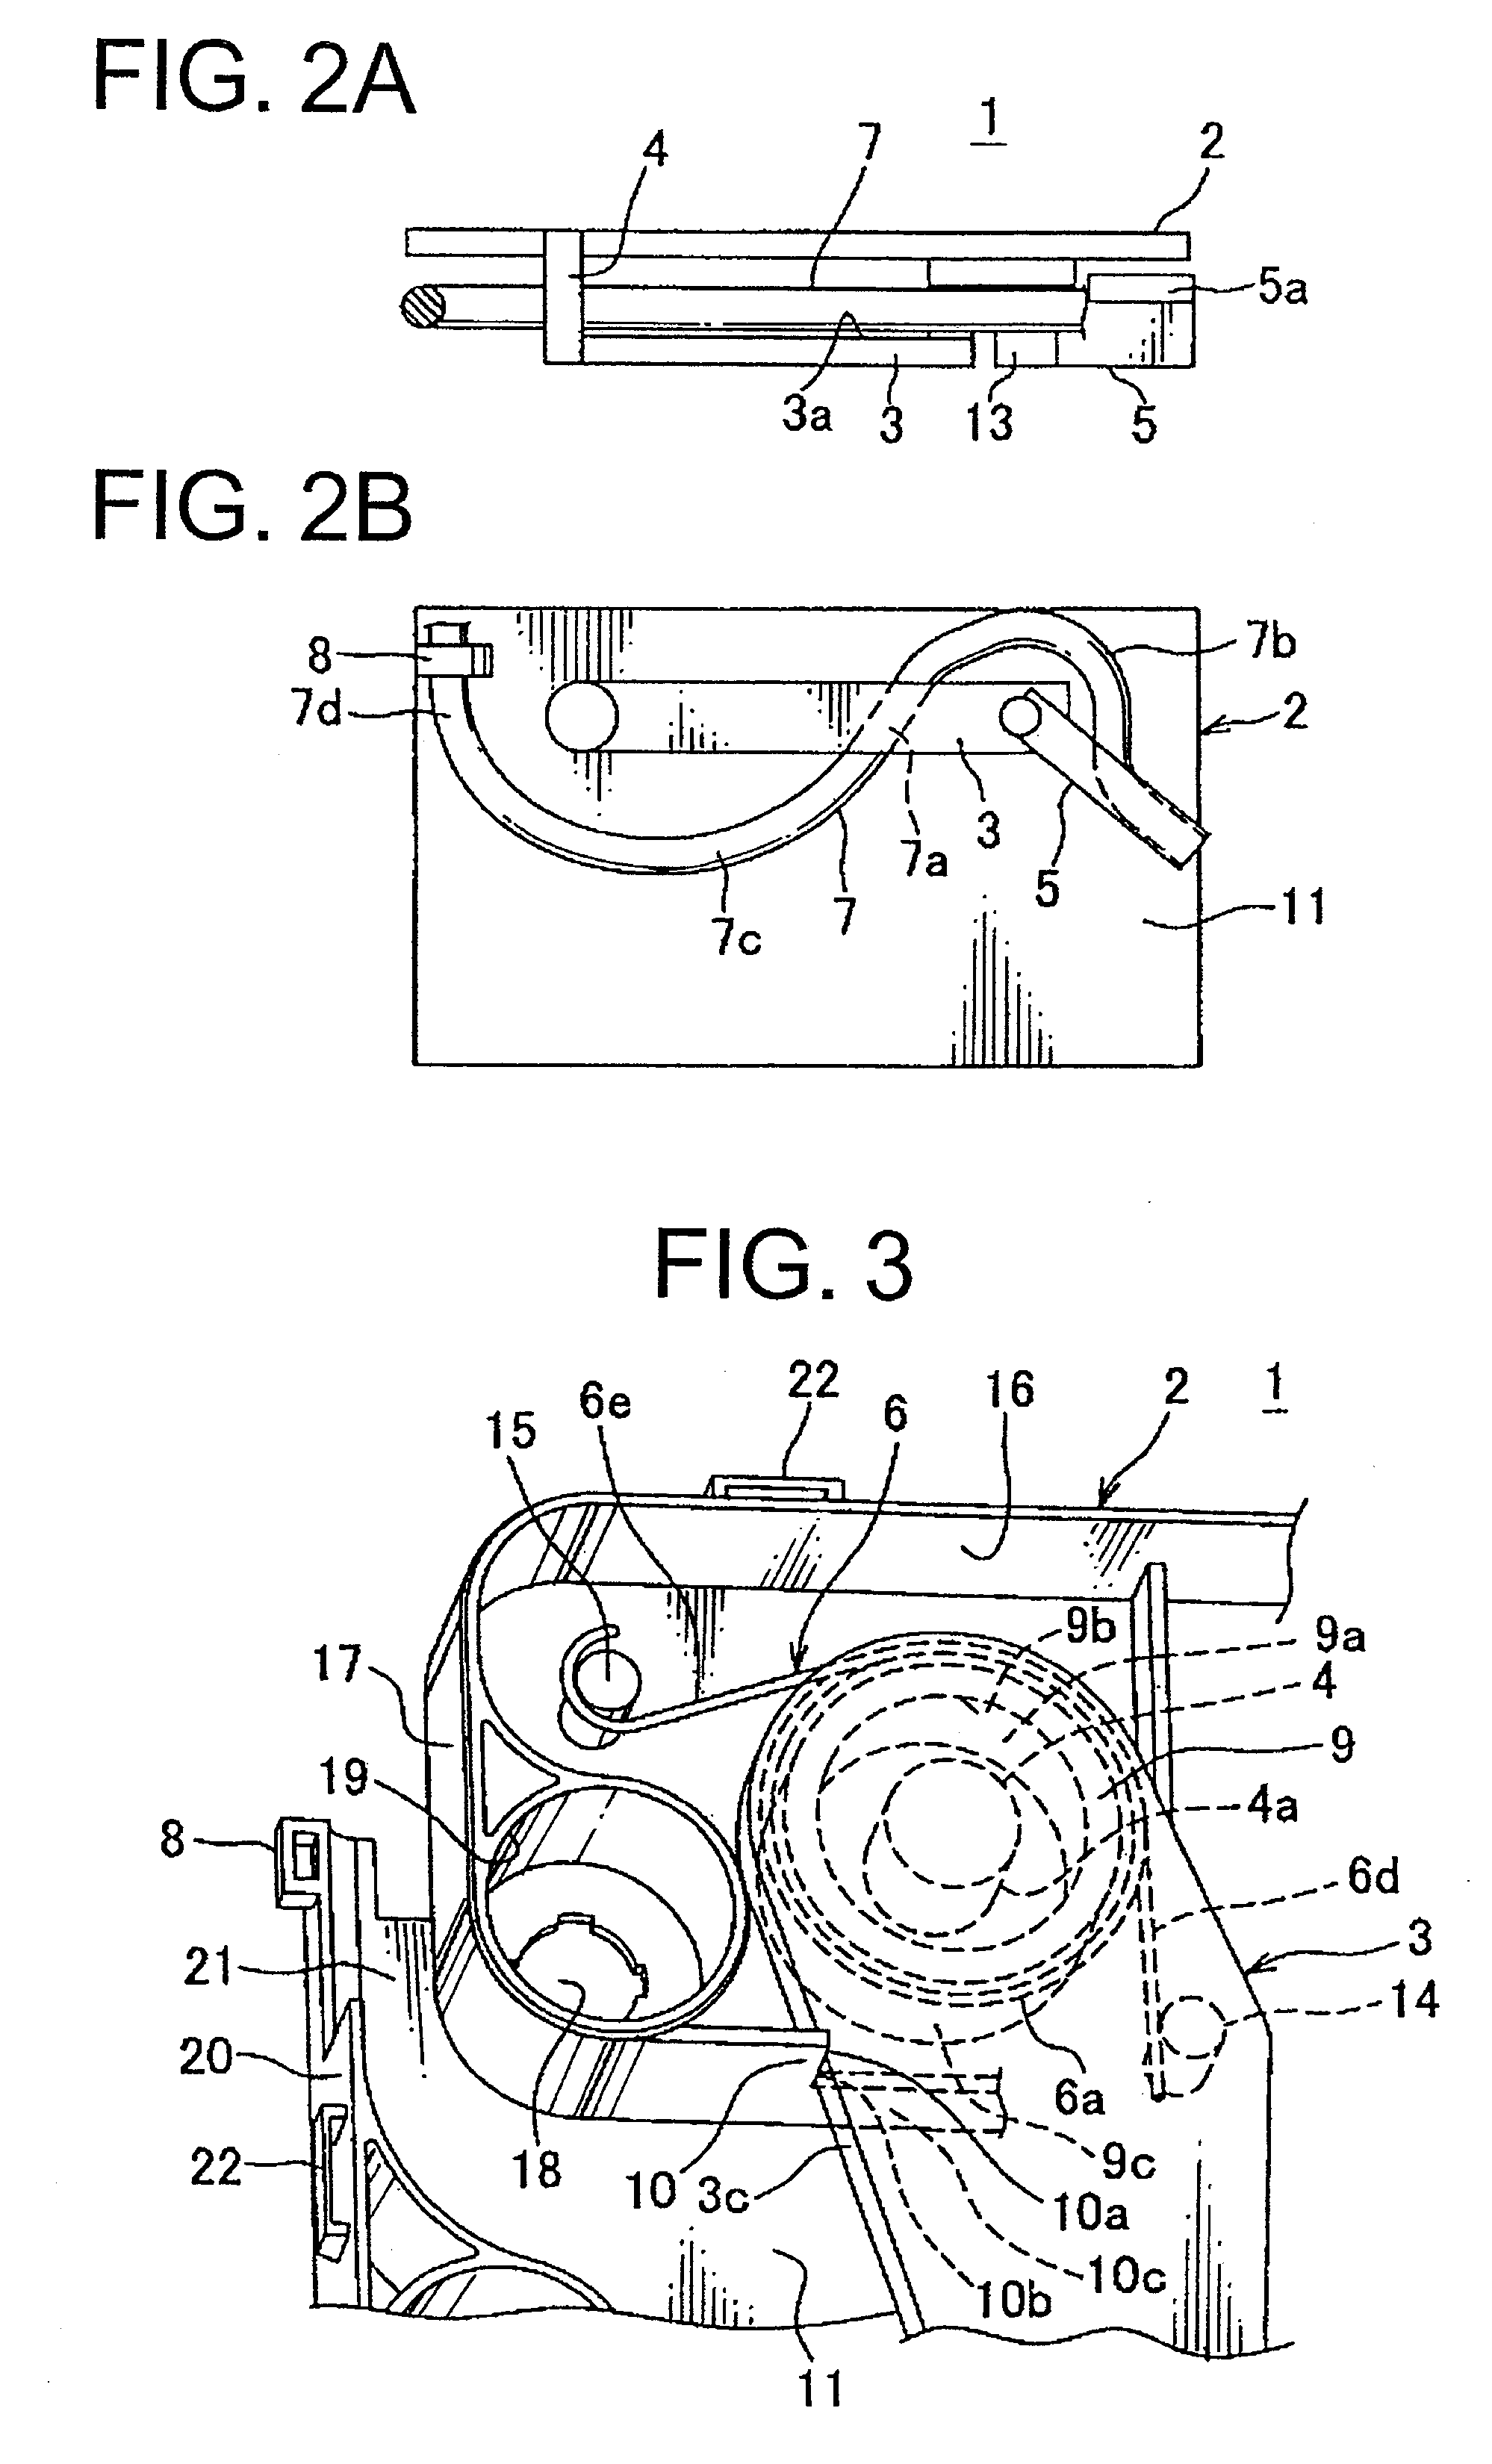 Power supplying system for a sliding structure